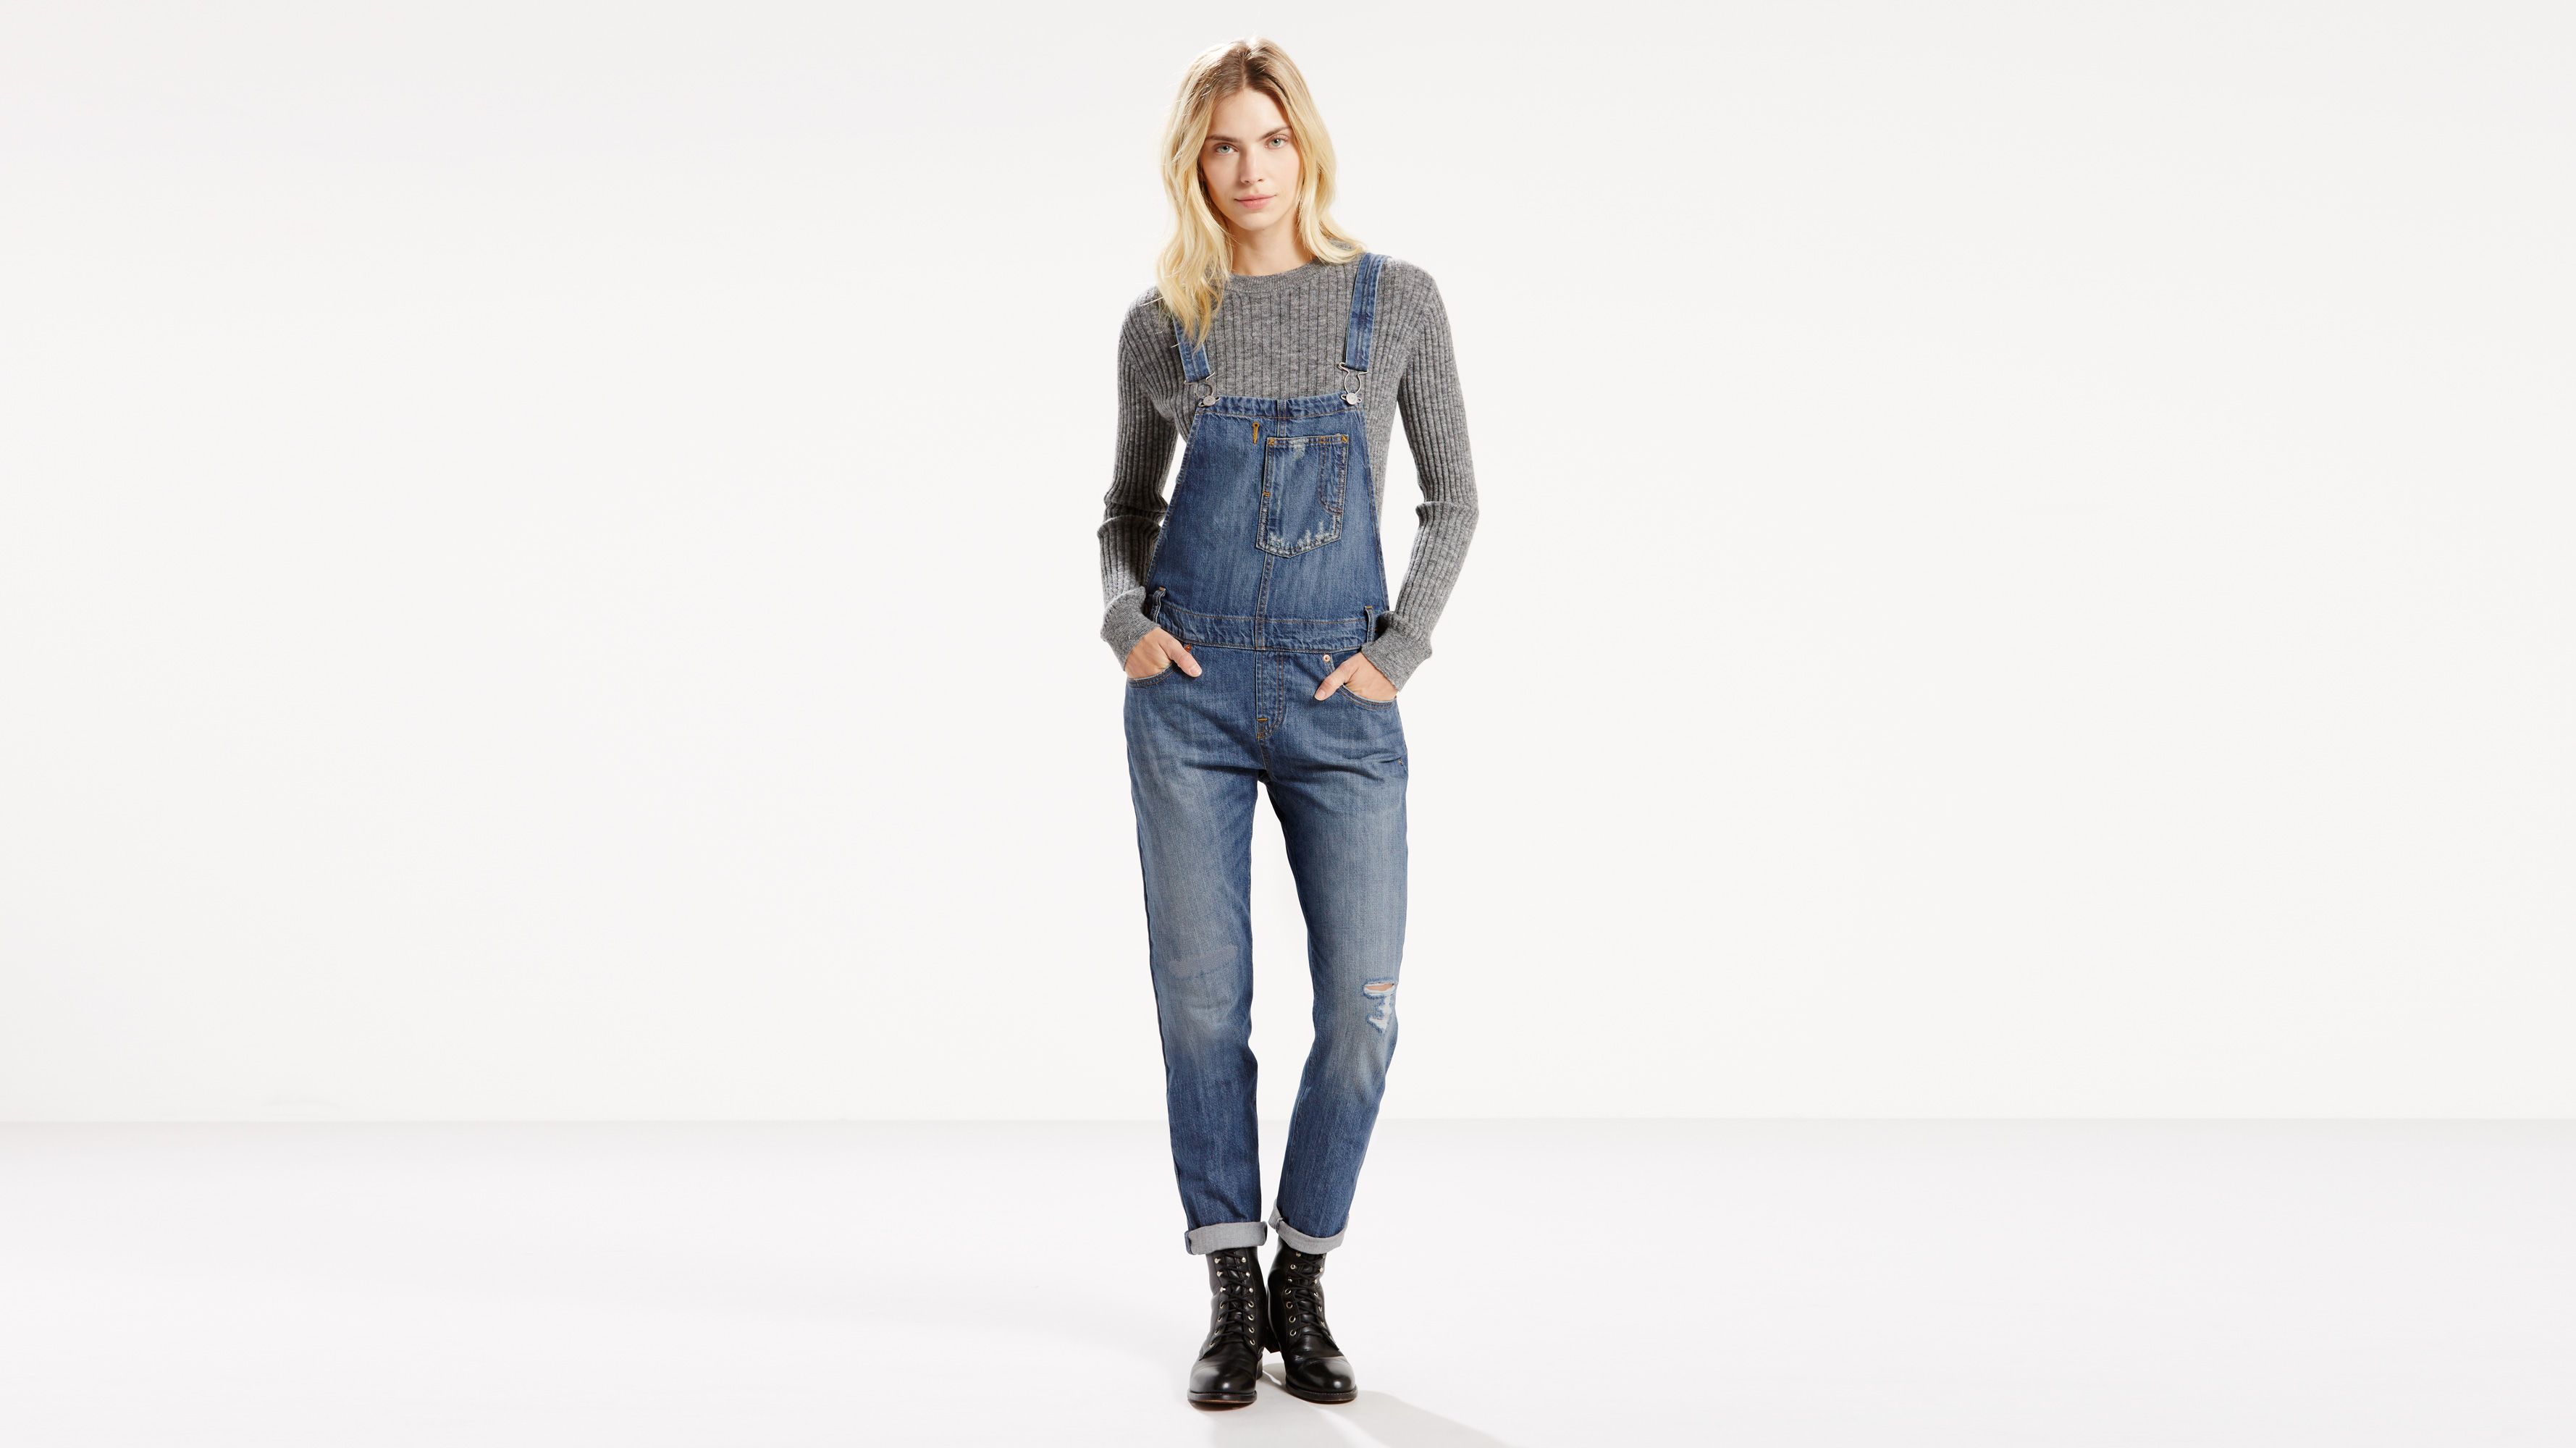 Details about   NEW WOMEN'S XXS M LEVI'S FITTED JEAN OVERALLS IN SO OVER IT DENIM 